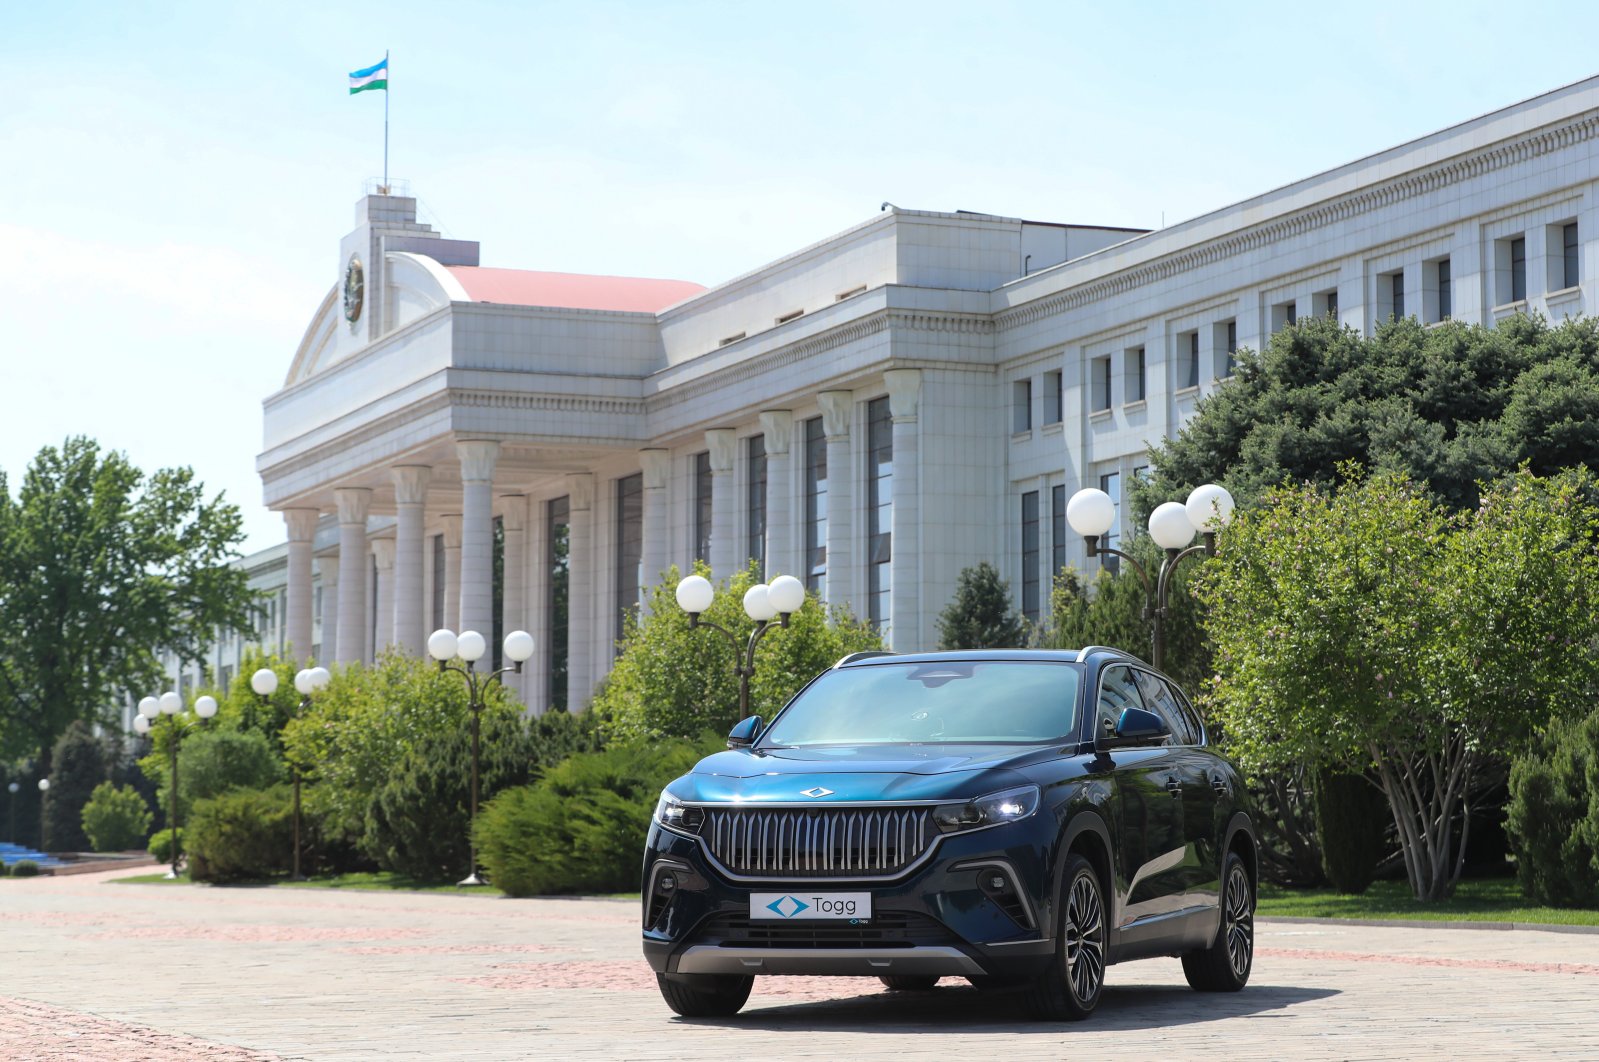 Togg seen in front of presidential palace in Tashkent, Uzbekistan, April 12, 2023. (DHA Photo)